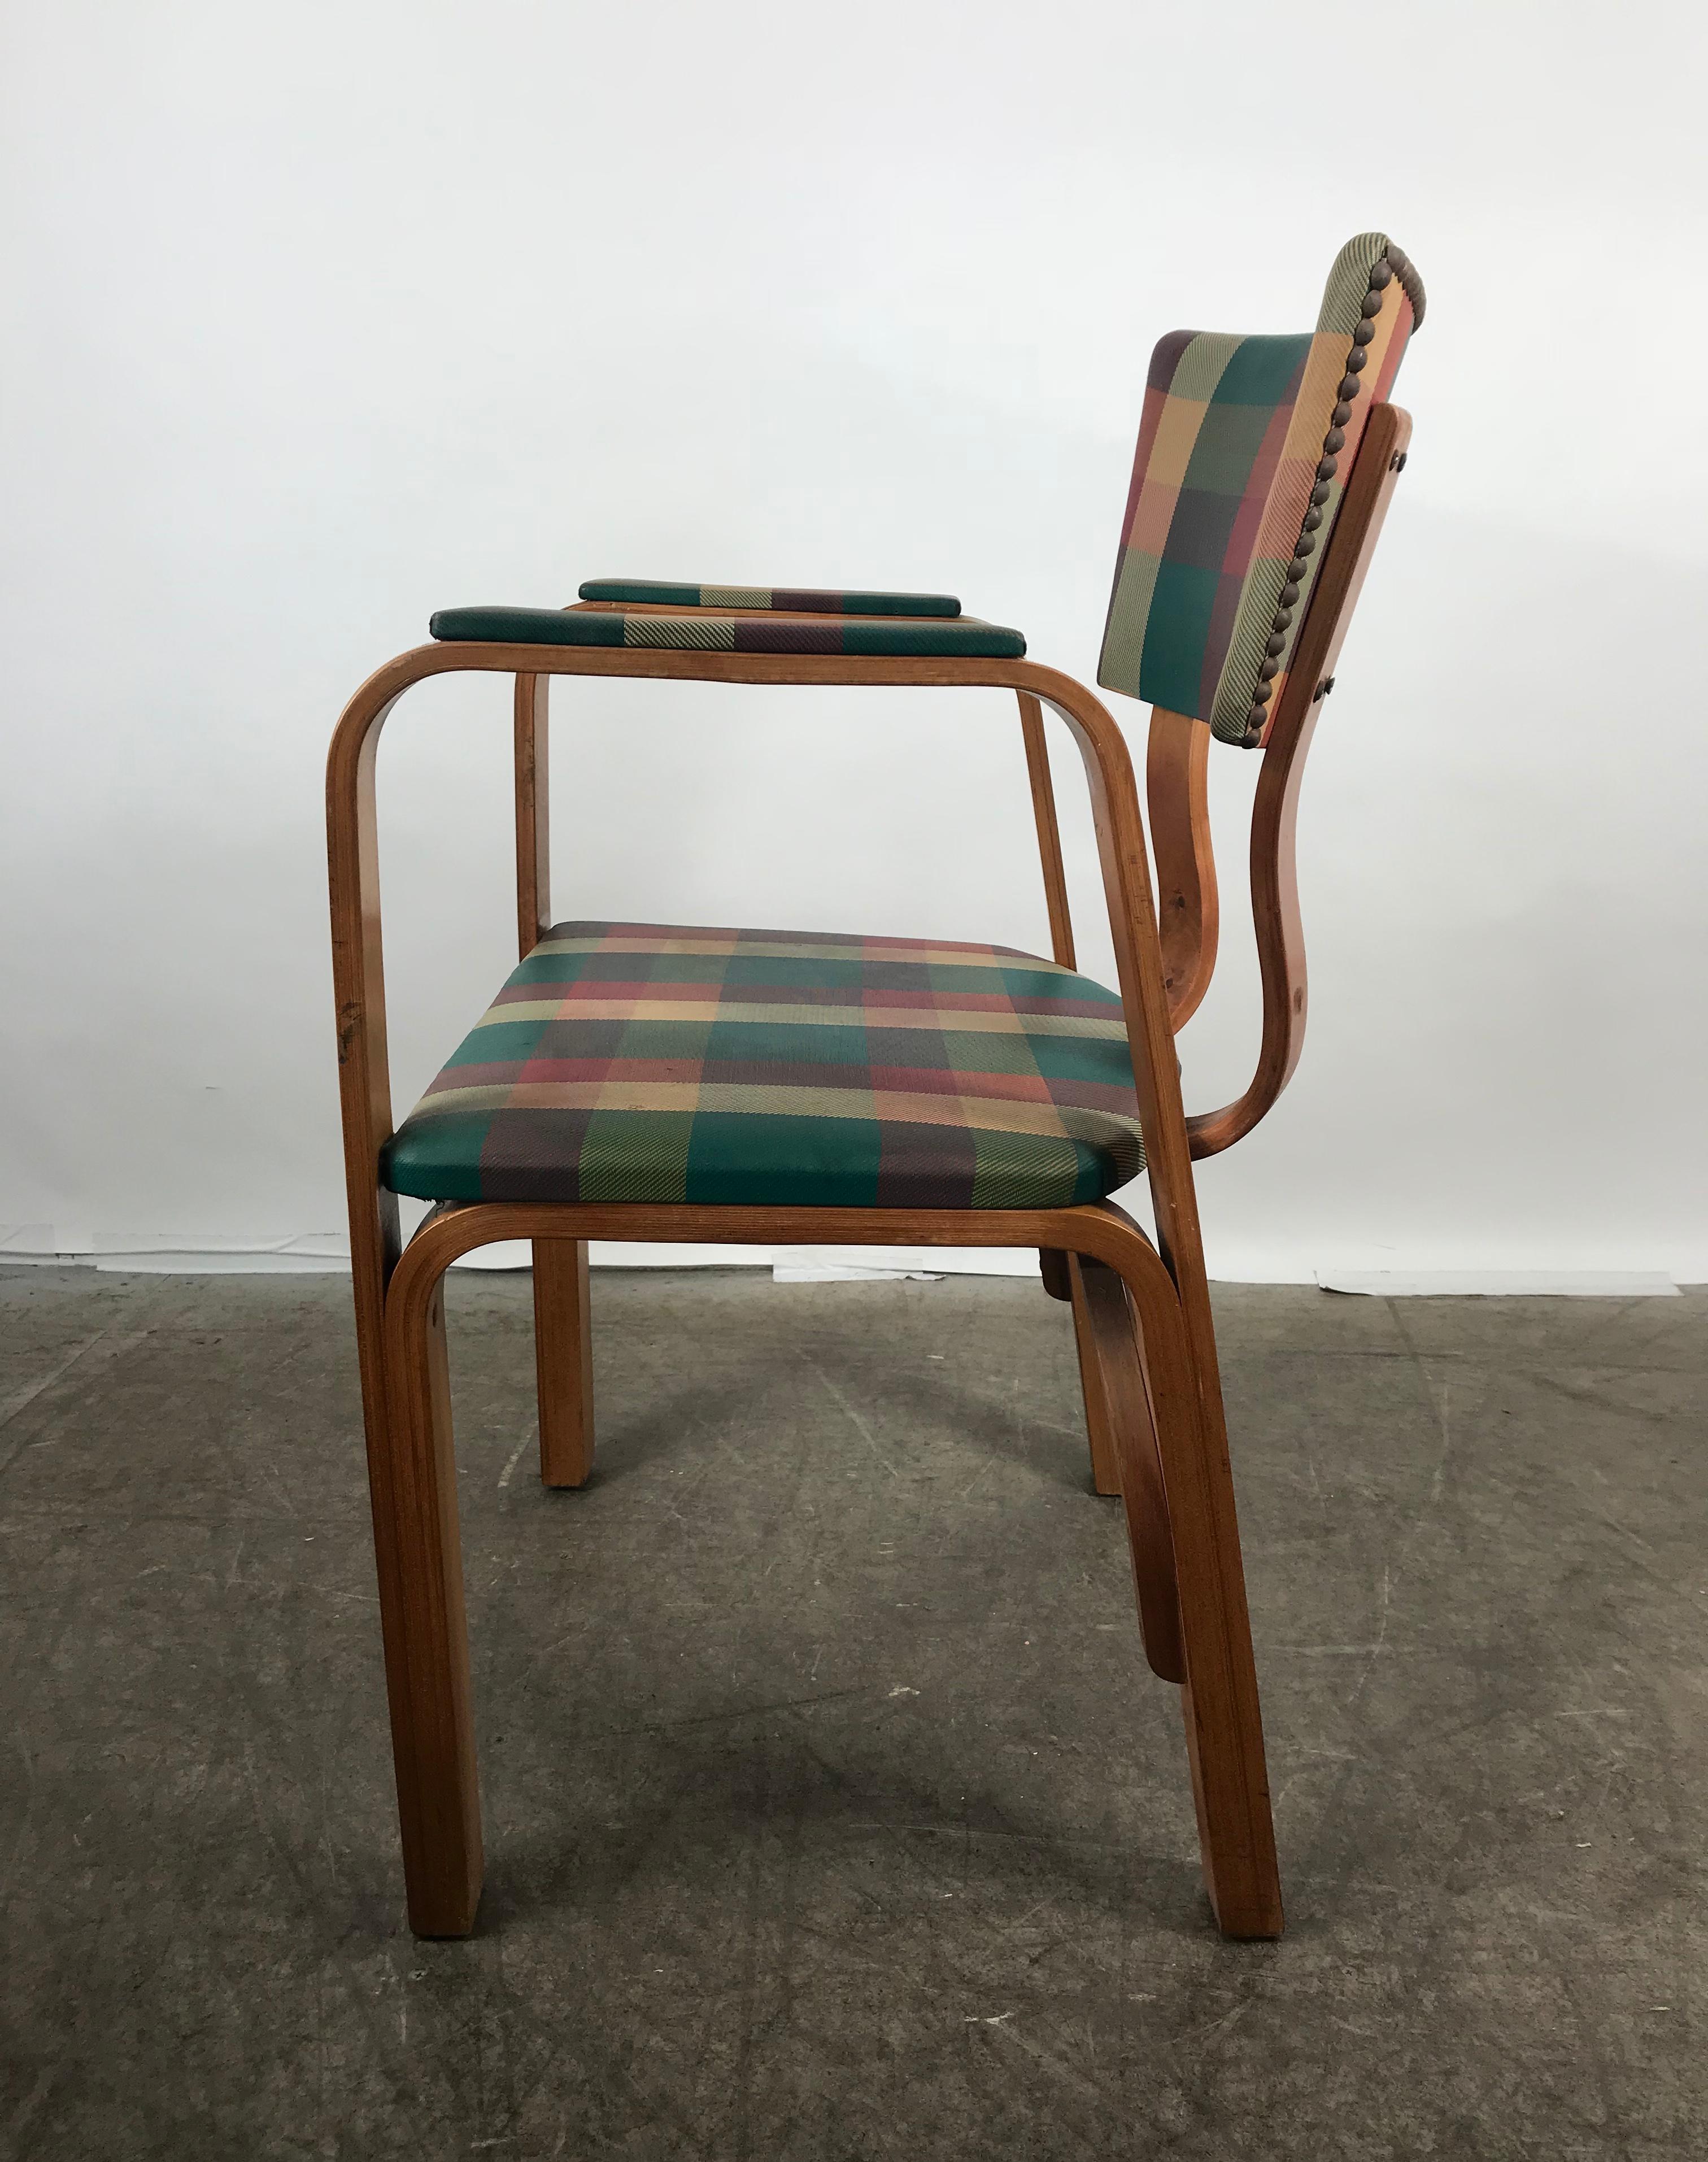 Bauhaus Classic Bentwood Armchair with Original Plaid Oil Cloth by Thonet Brothers 1940 For Sale